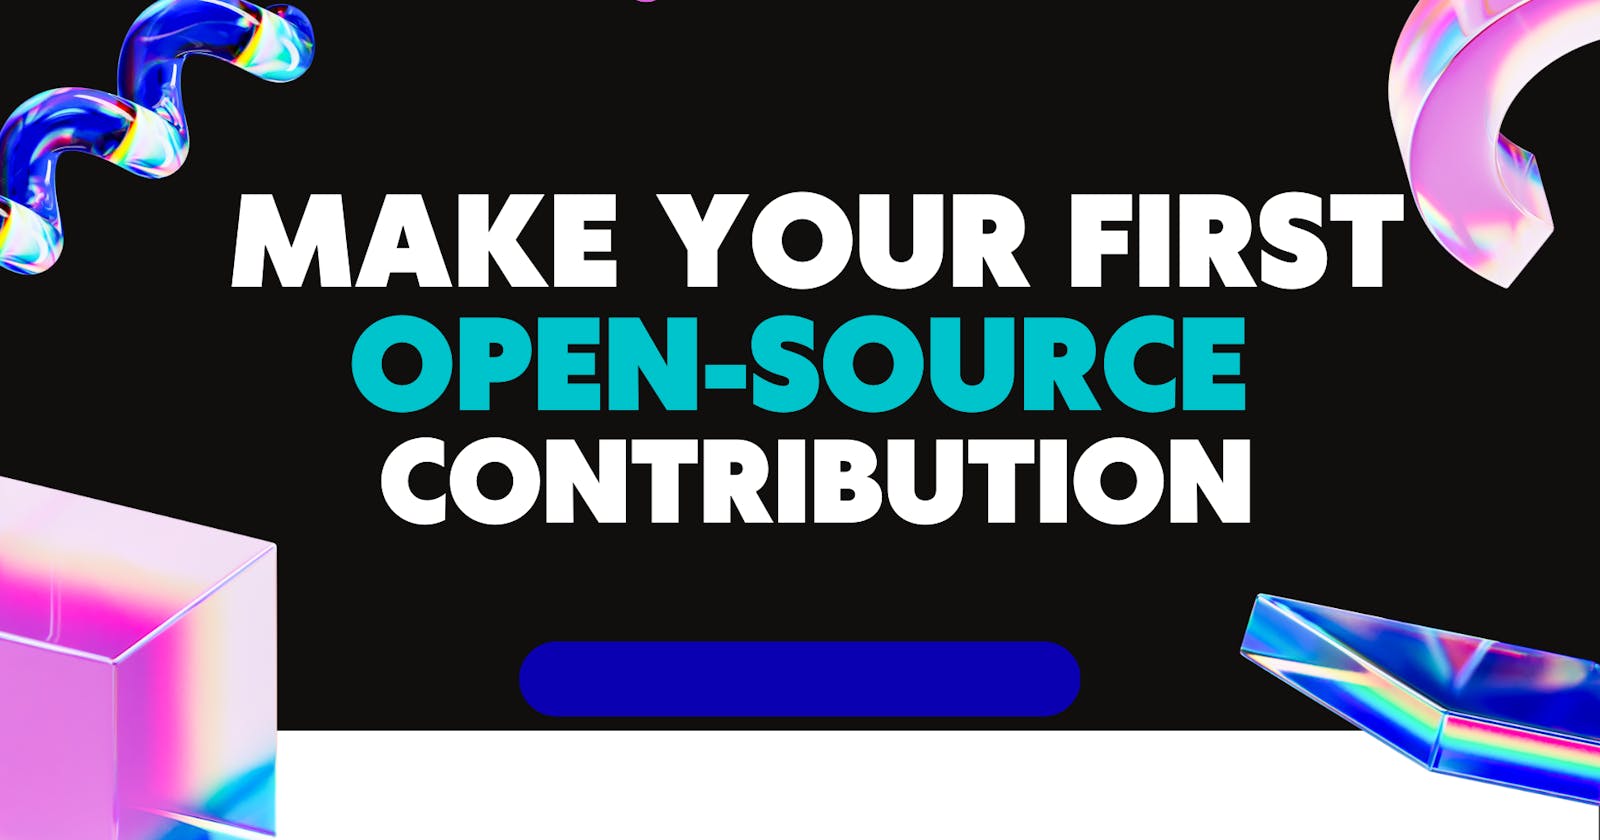 How to make your first Open Source contribution?